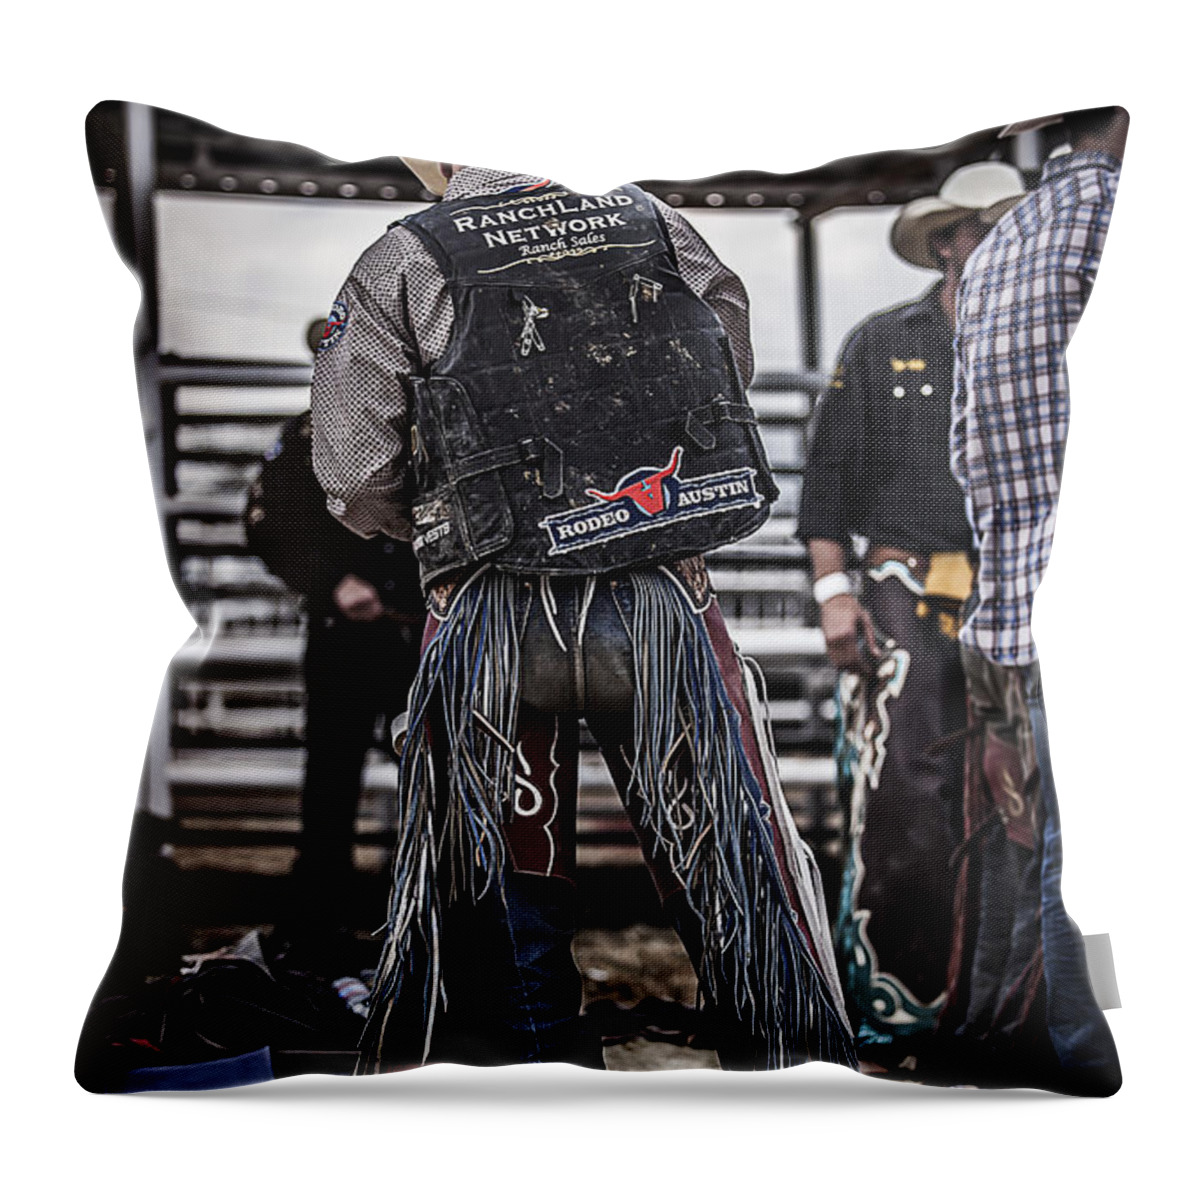 Landscapes Throw Pillow featuring the photograph Before The Ride by Amber Kresge